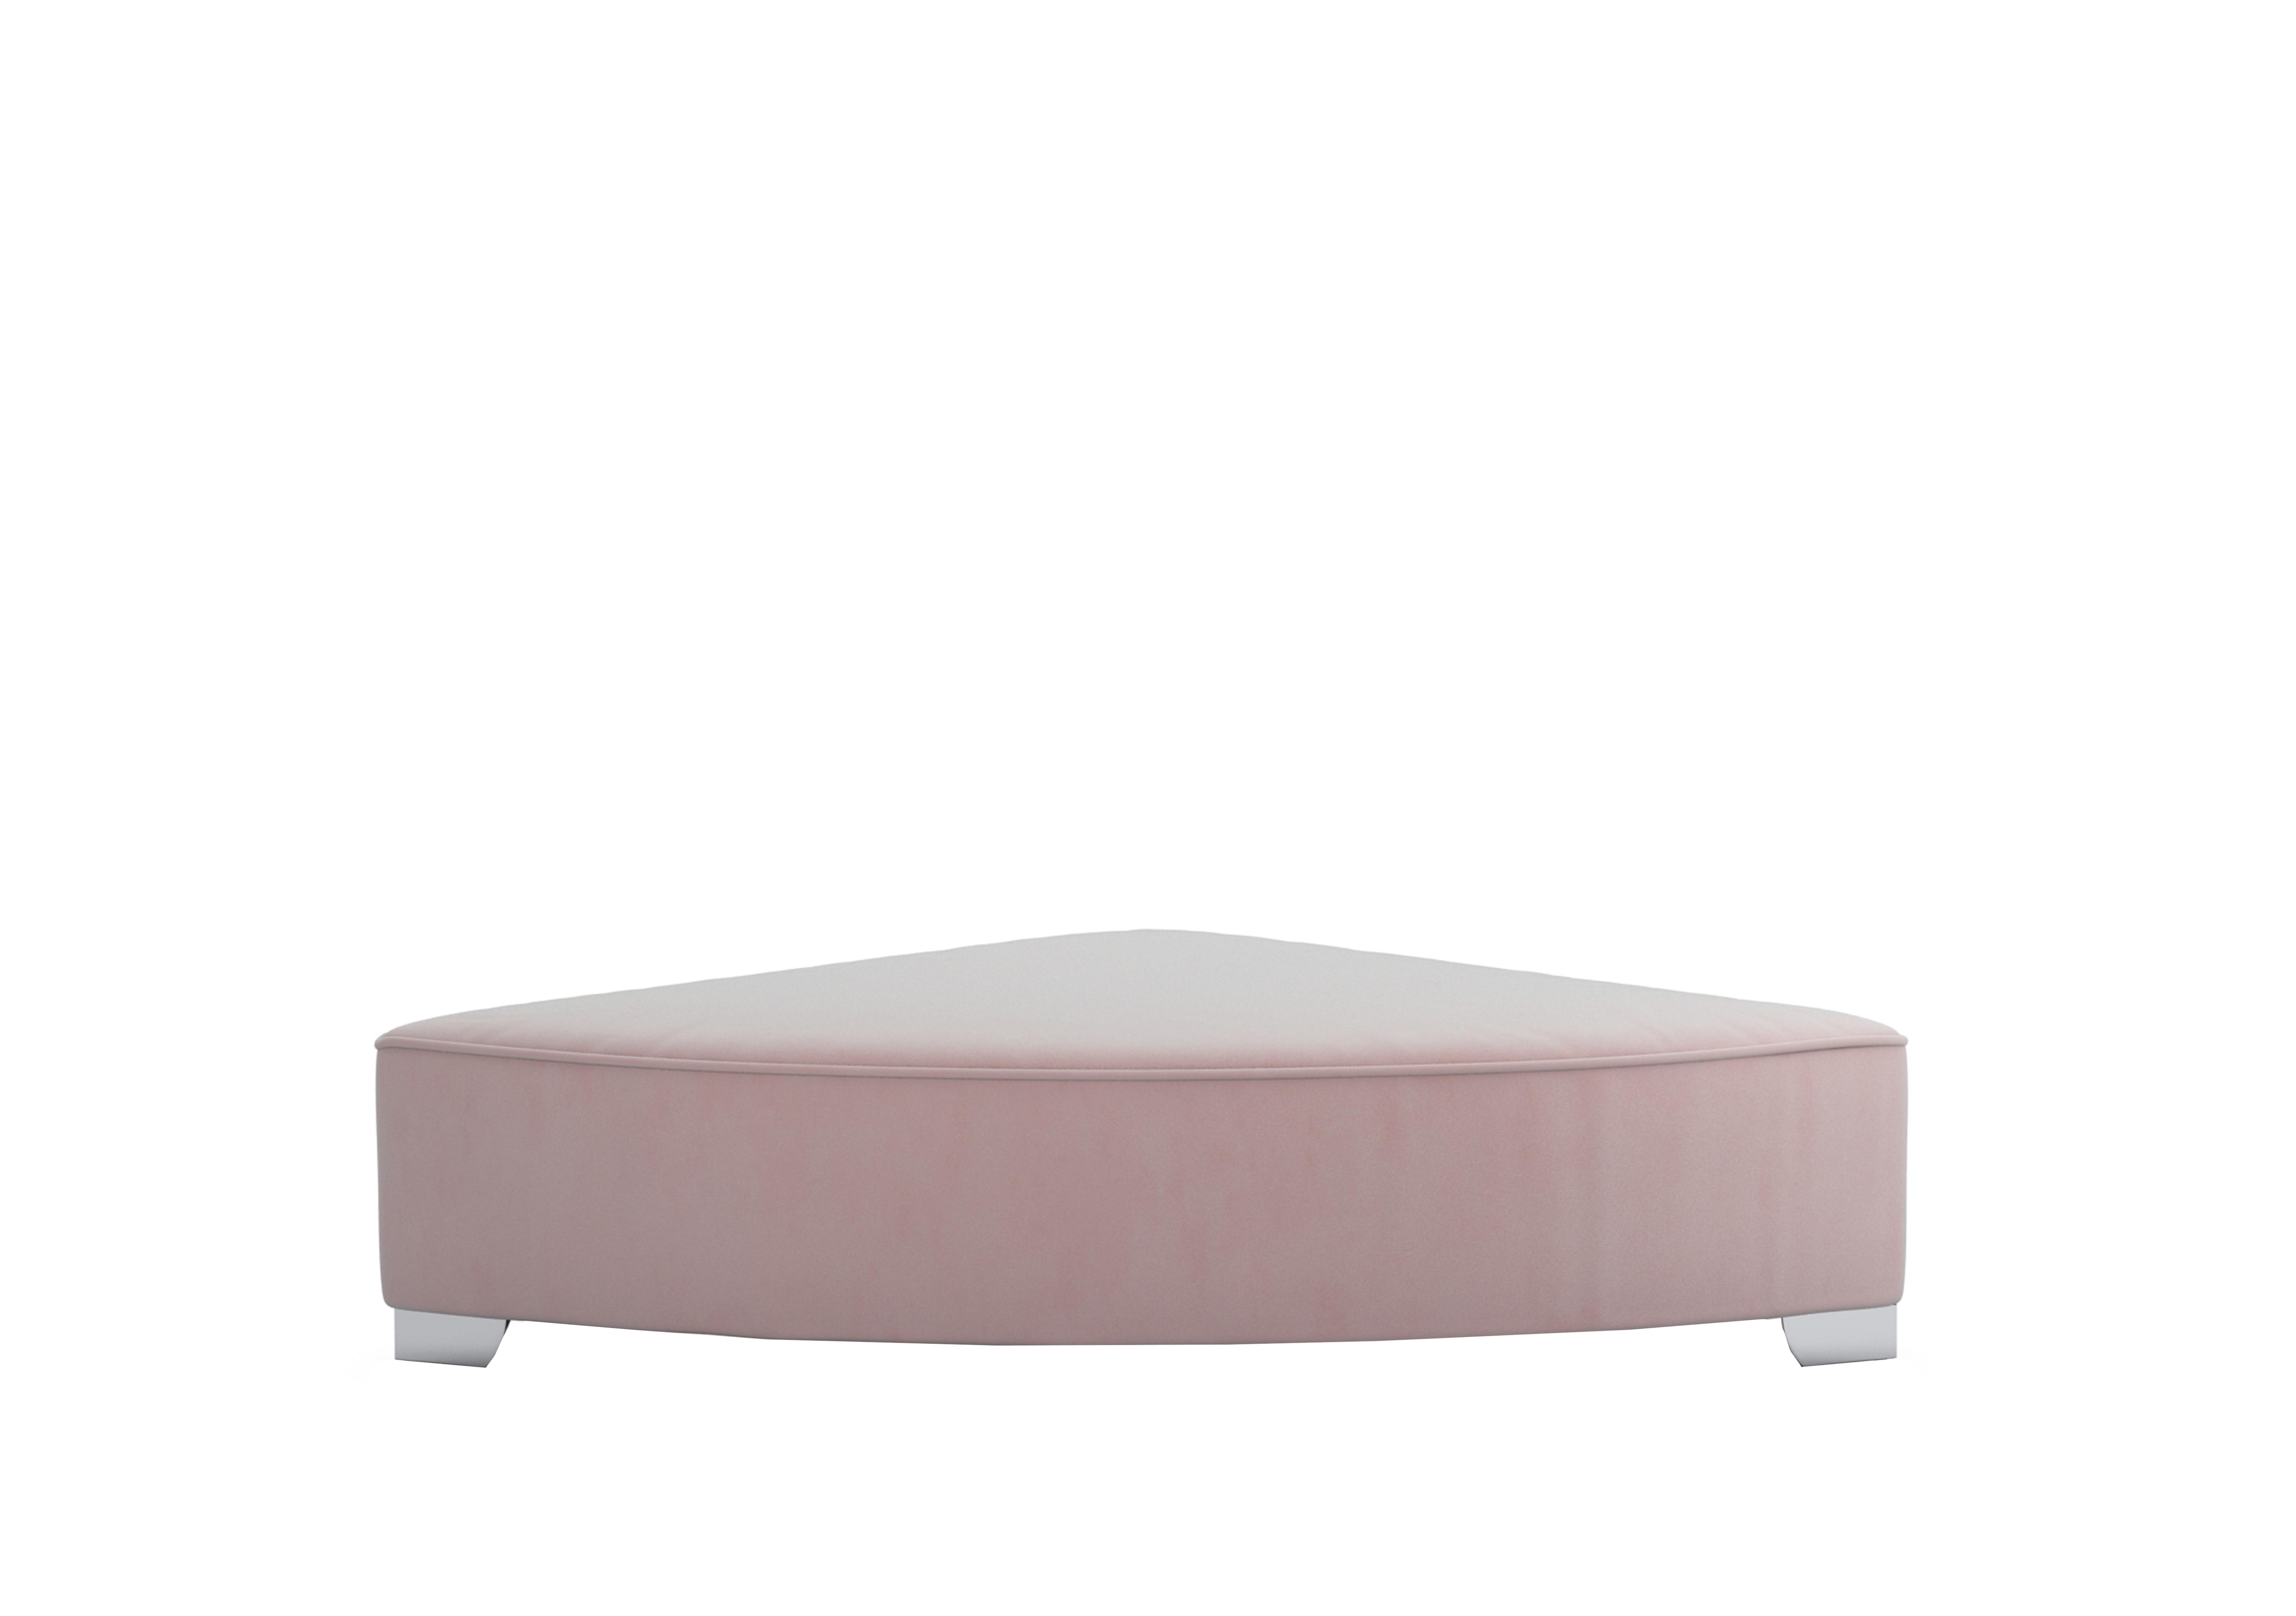 Isobel Fabric Wedge Footstool in Cot256 Cotton Candy Ch Ft on Furniture Village